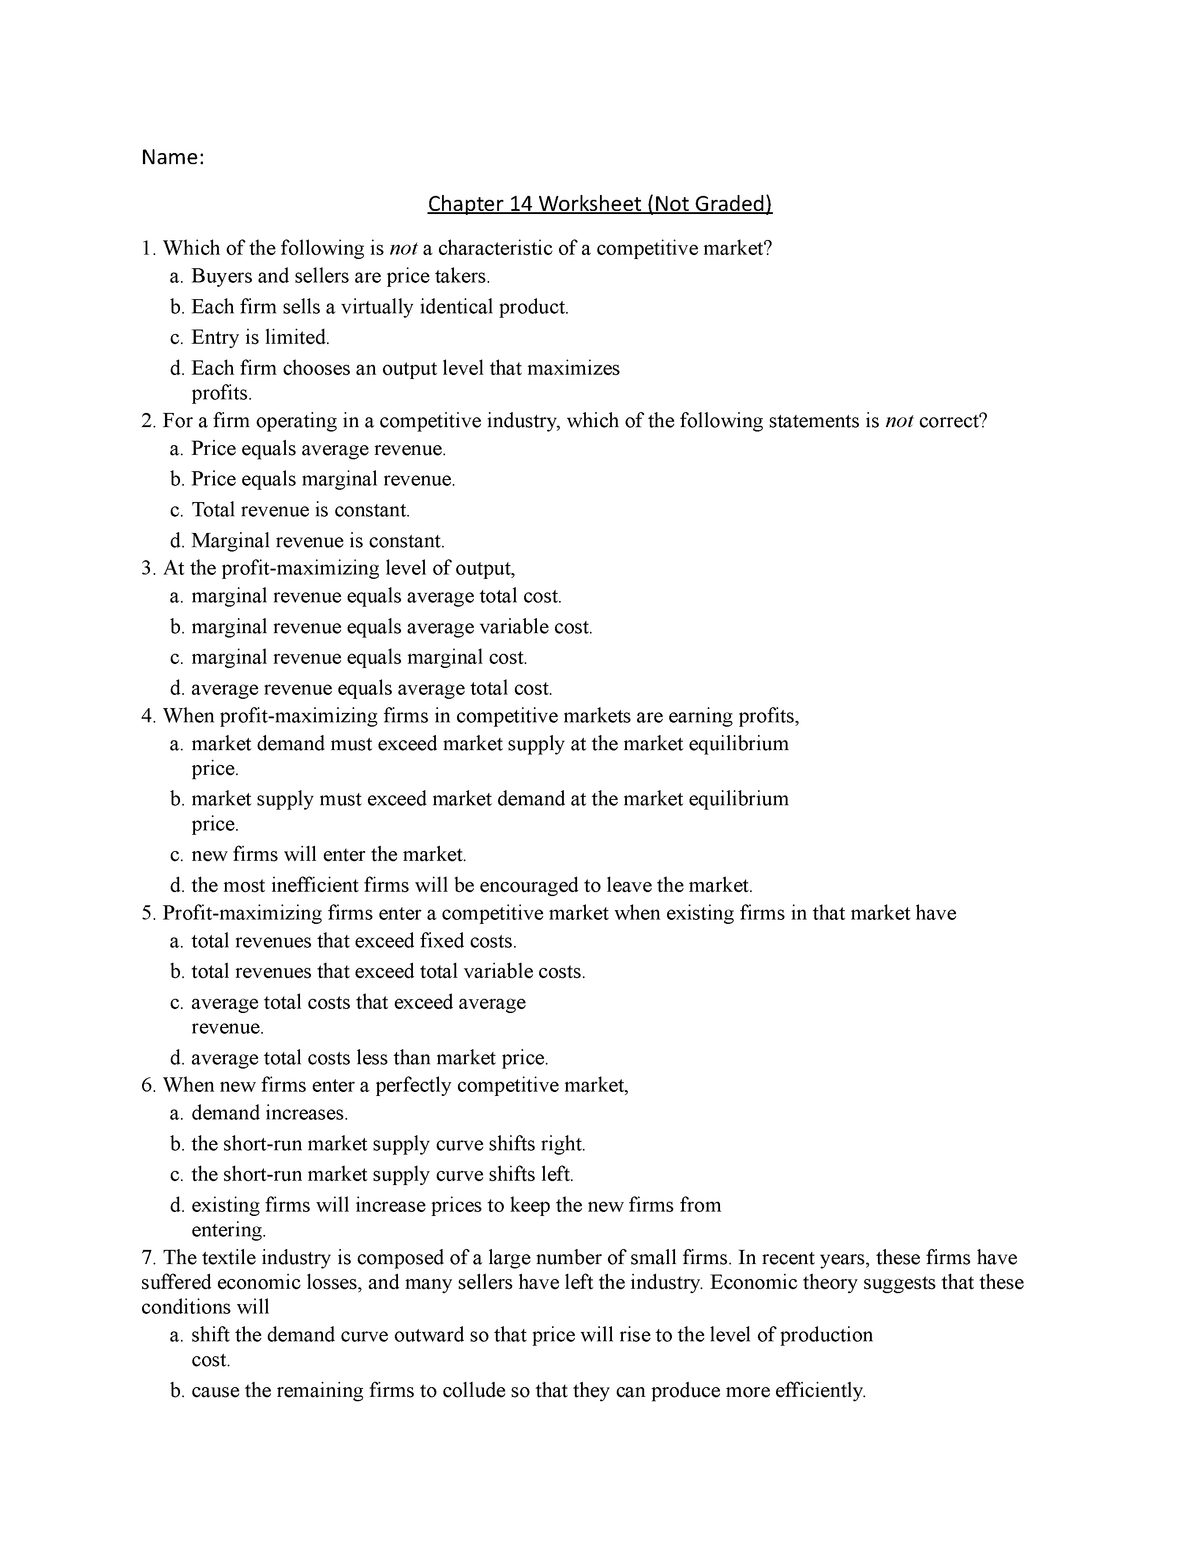 Chapter 14 Worksheet Not Graded Name Chapter 14 Worksheet Not Graded 1 Which Of The